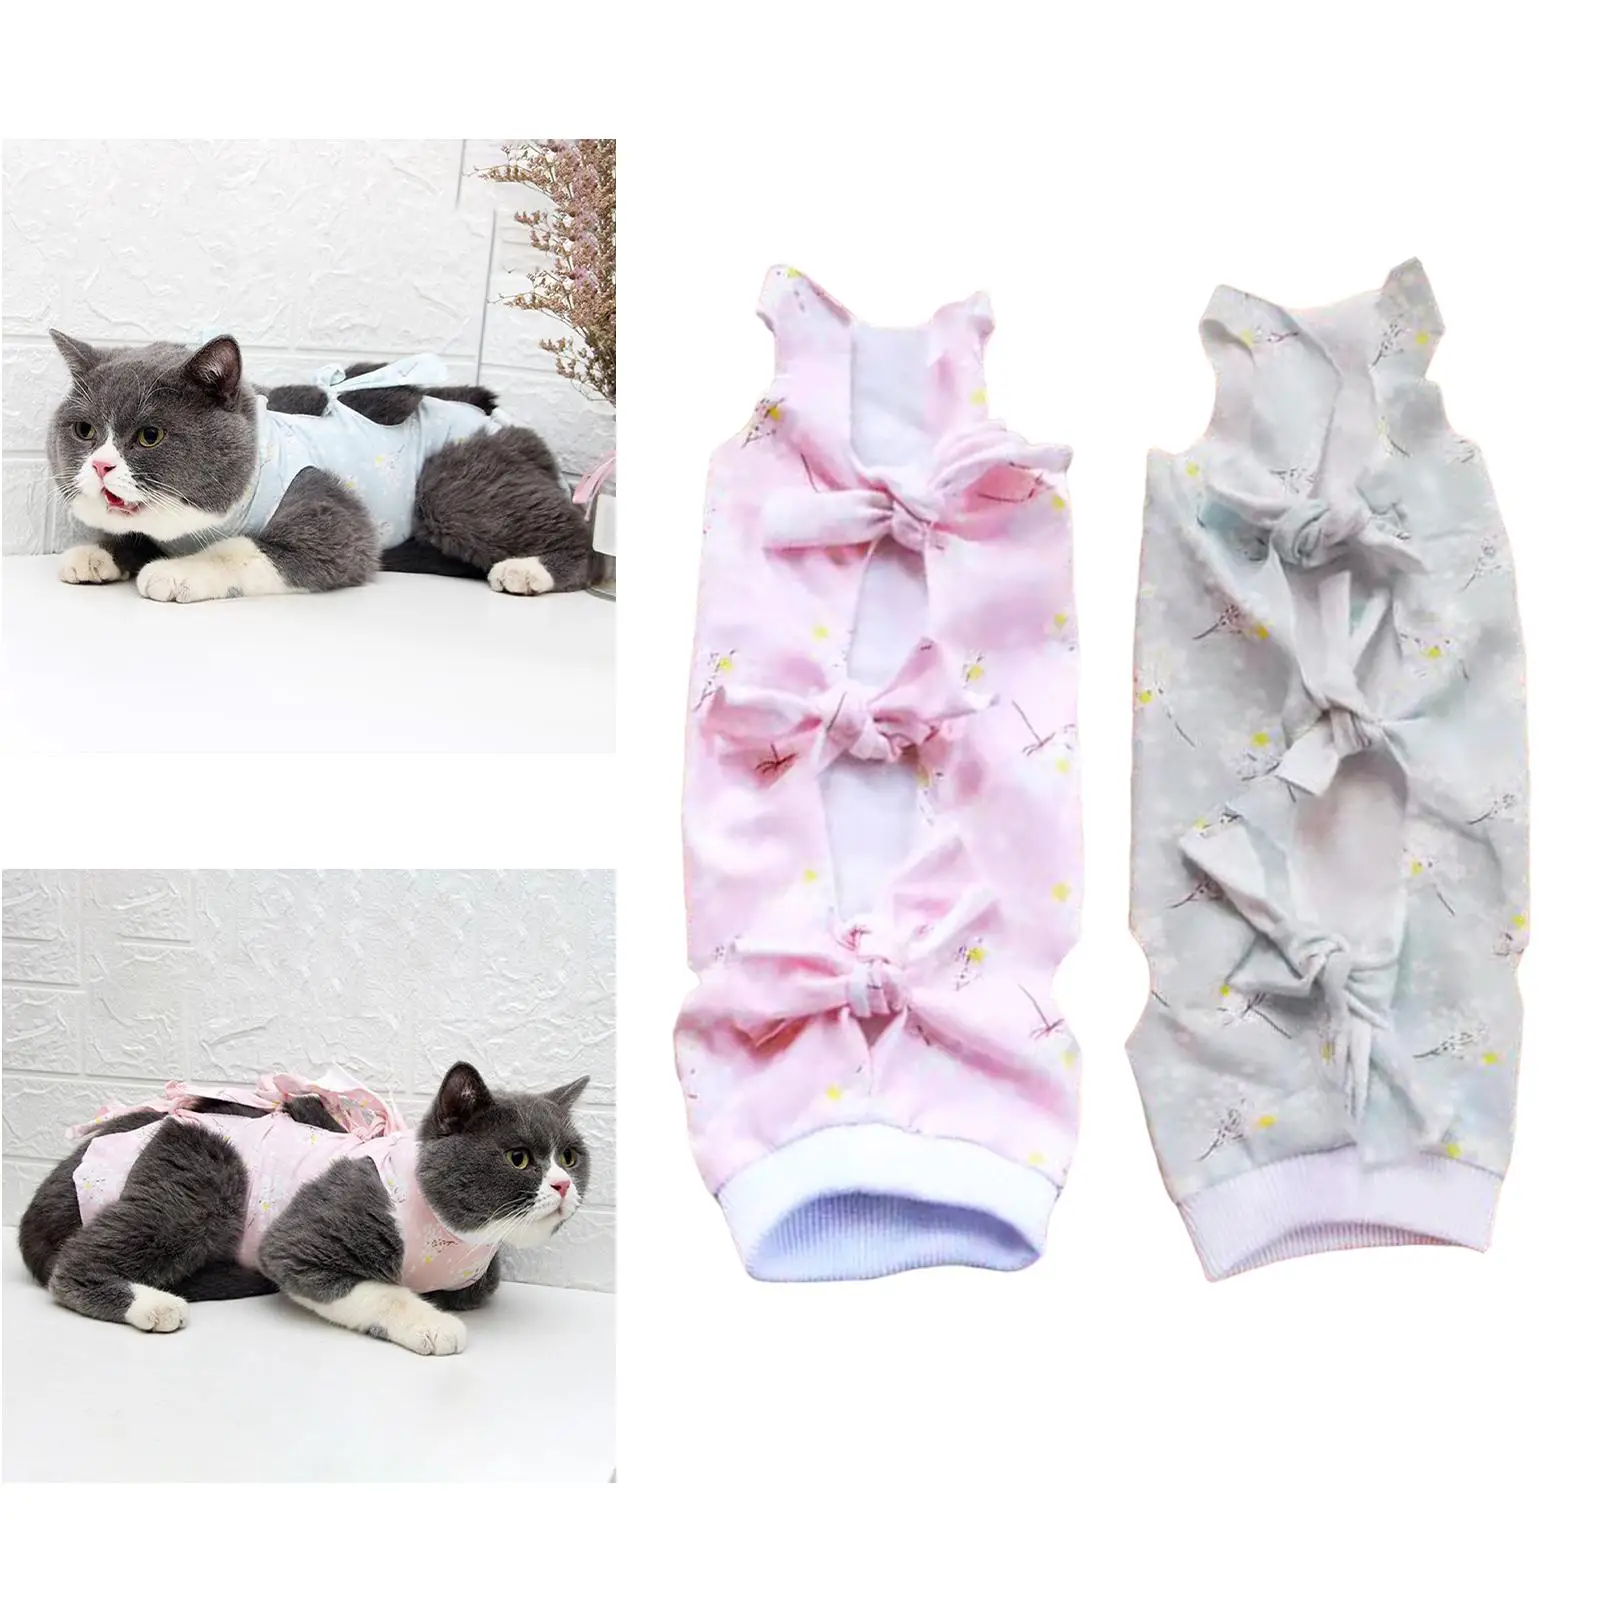 Cat Recovery Suit Clothes Sanitary Pants Professional Breathable Anti Licking for Abdominal Wounds Cats Kittens Home